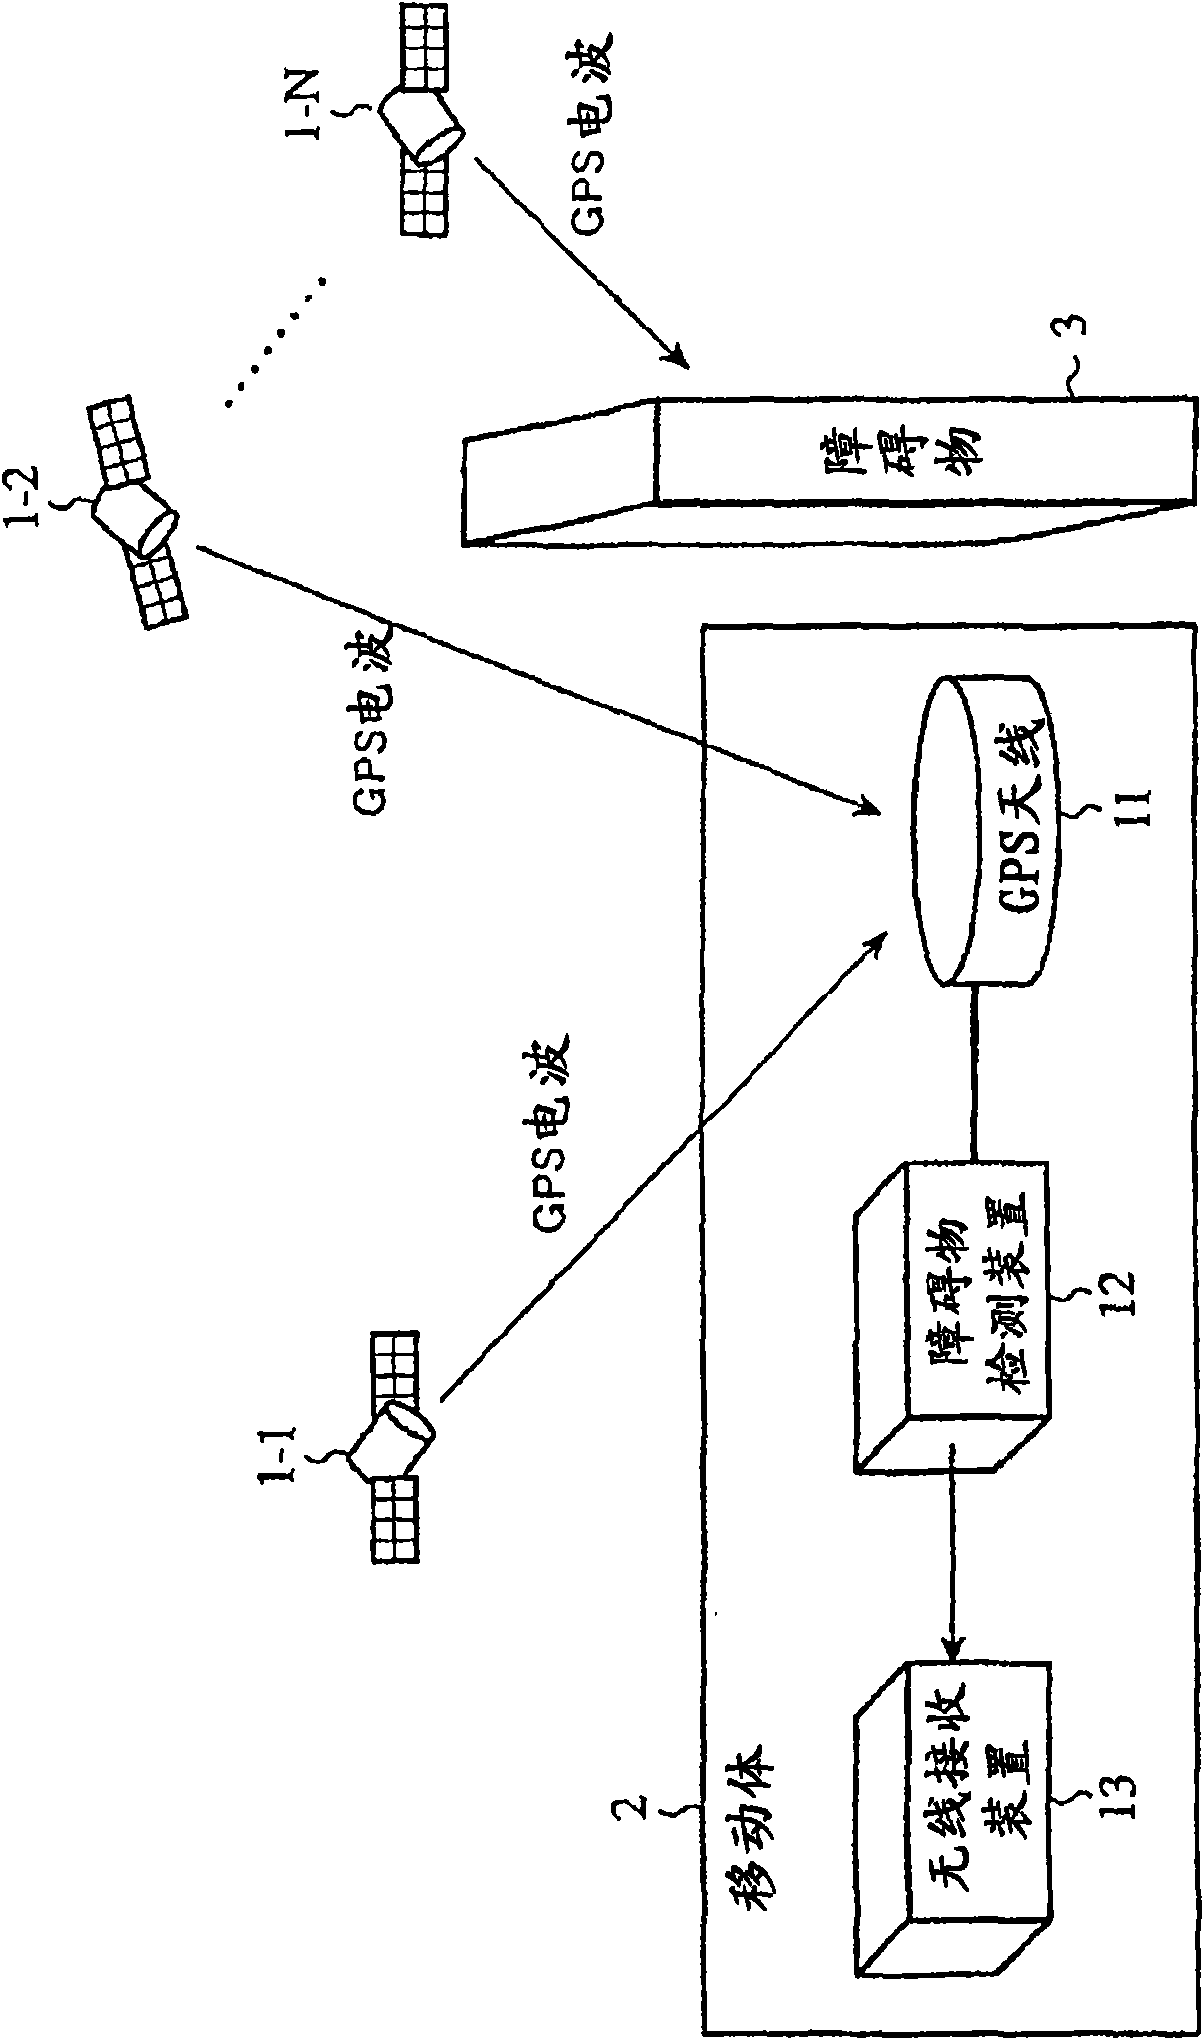 Obstacle detector, wireless receiver, wireless transmitter, and wireless communication system